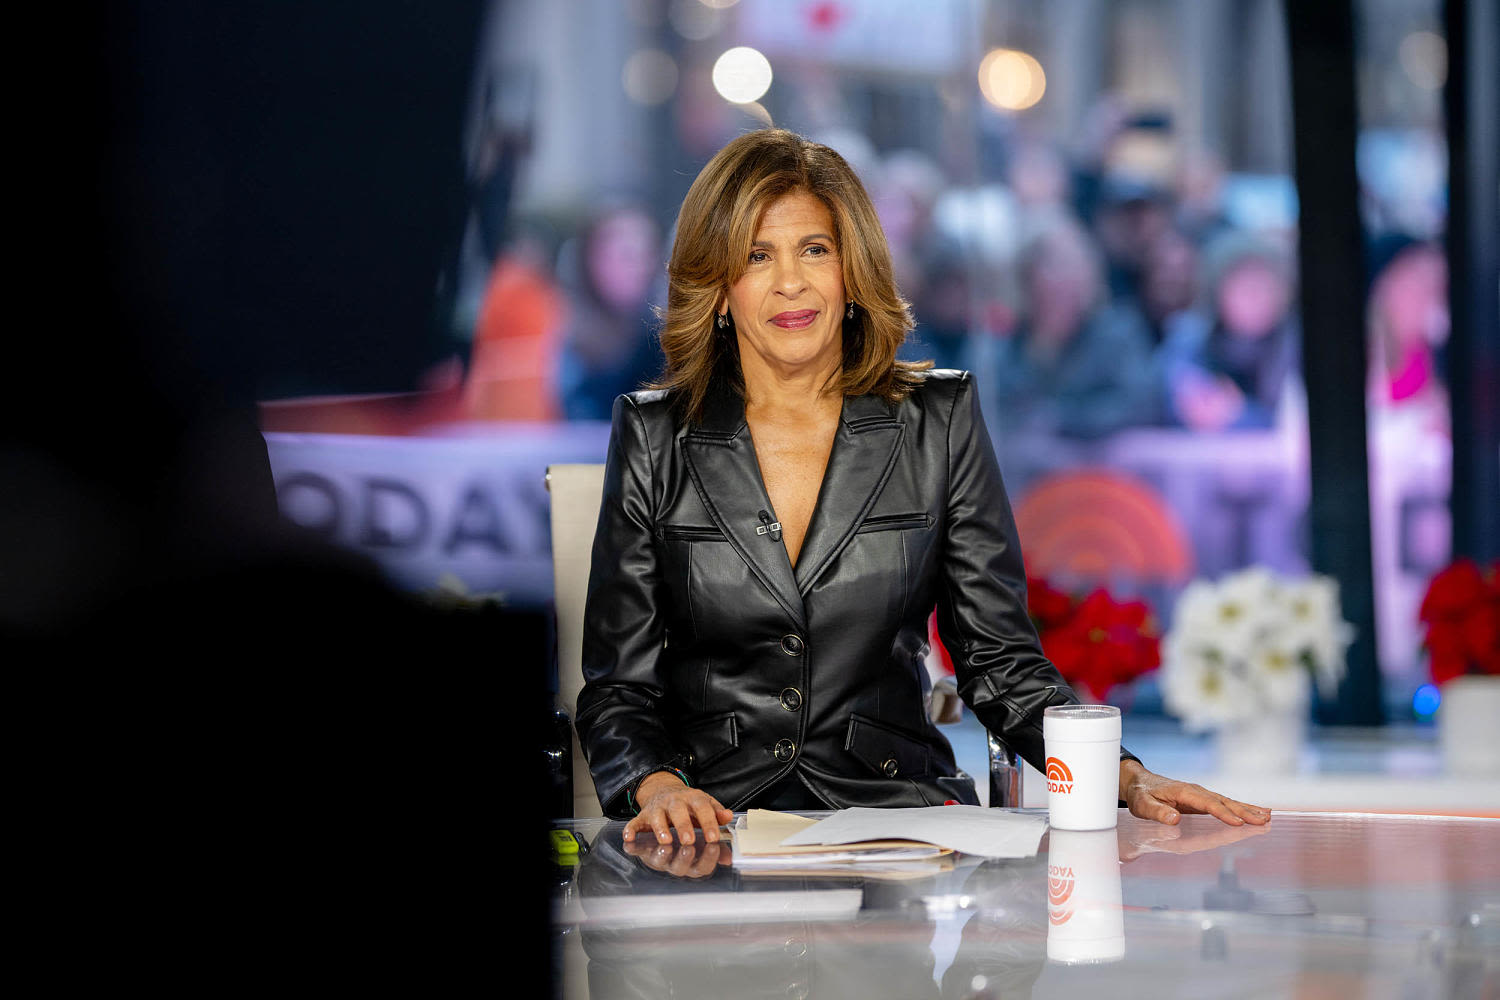 Hoda recalls unforgettable gesture from her friend to support her after her dad died: ‘That’s what it’s about’